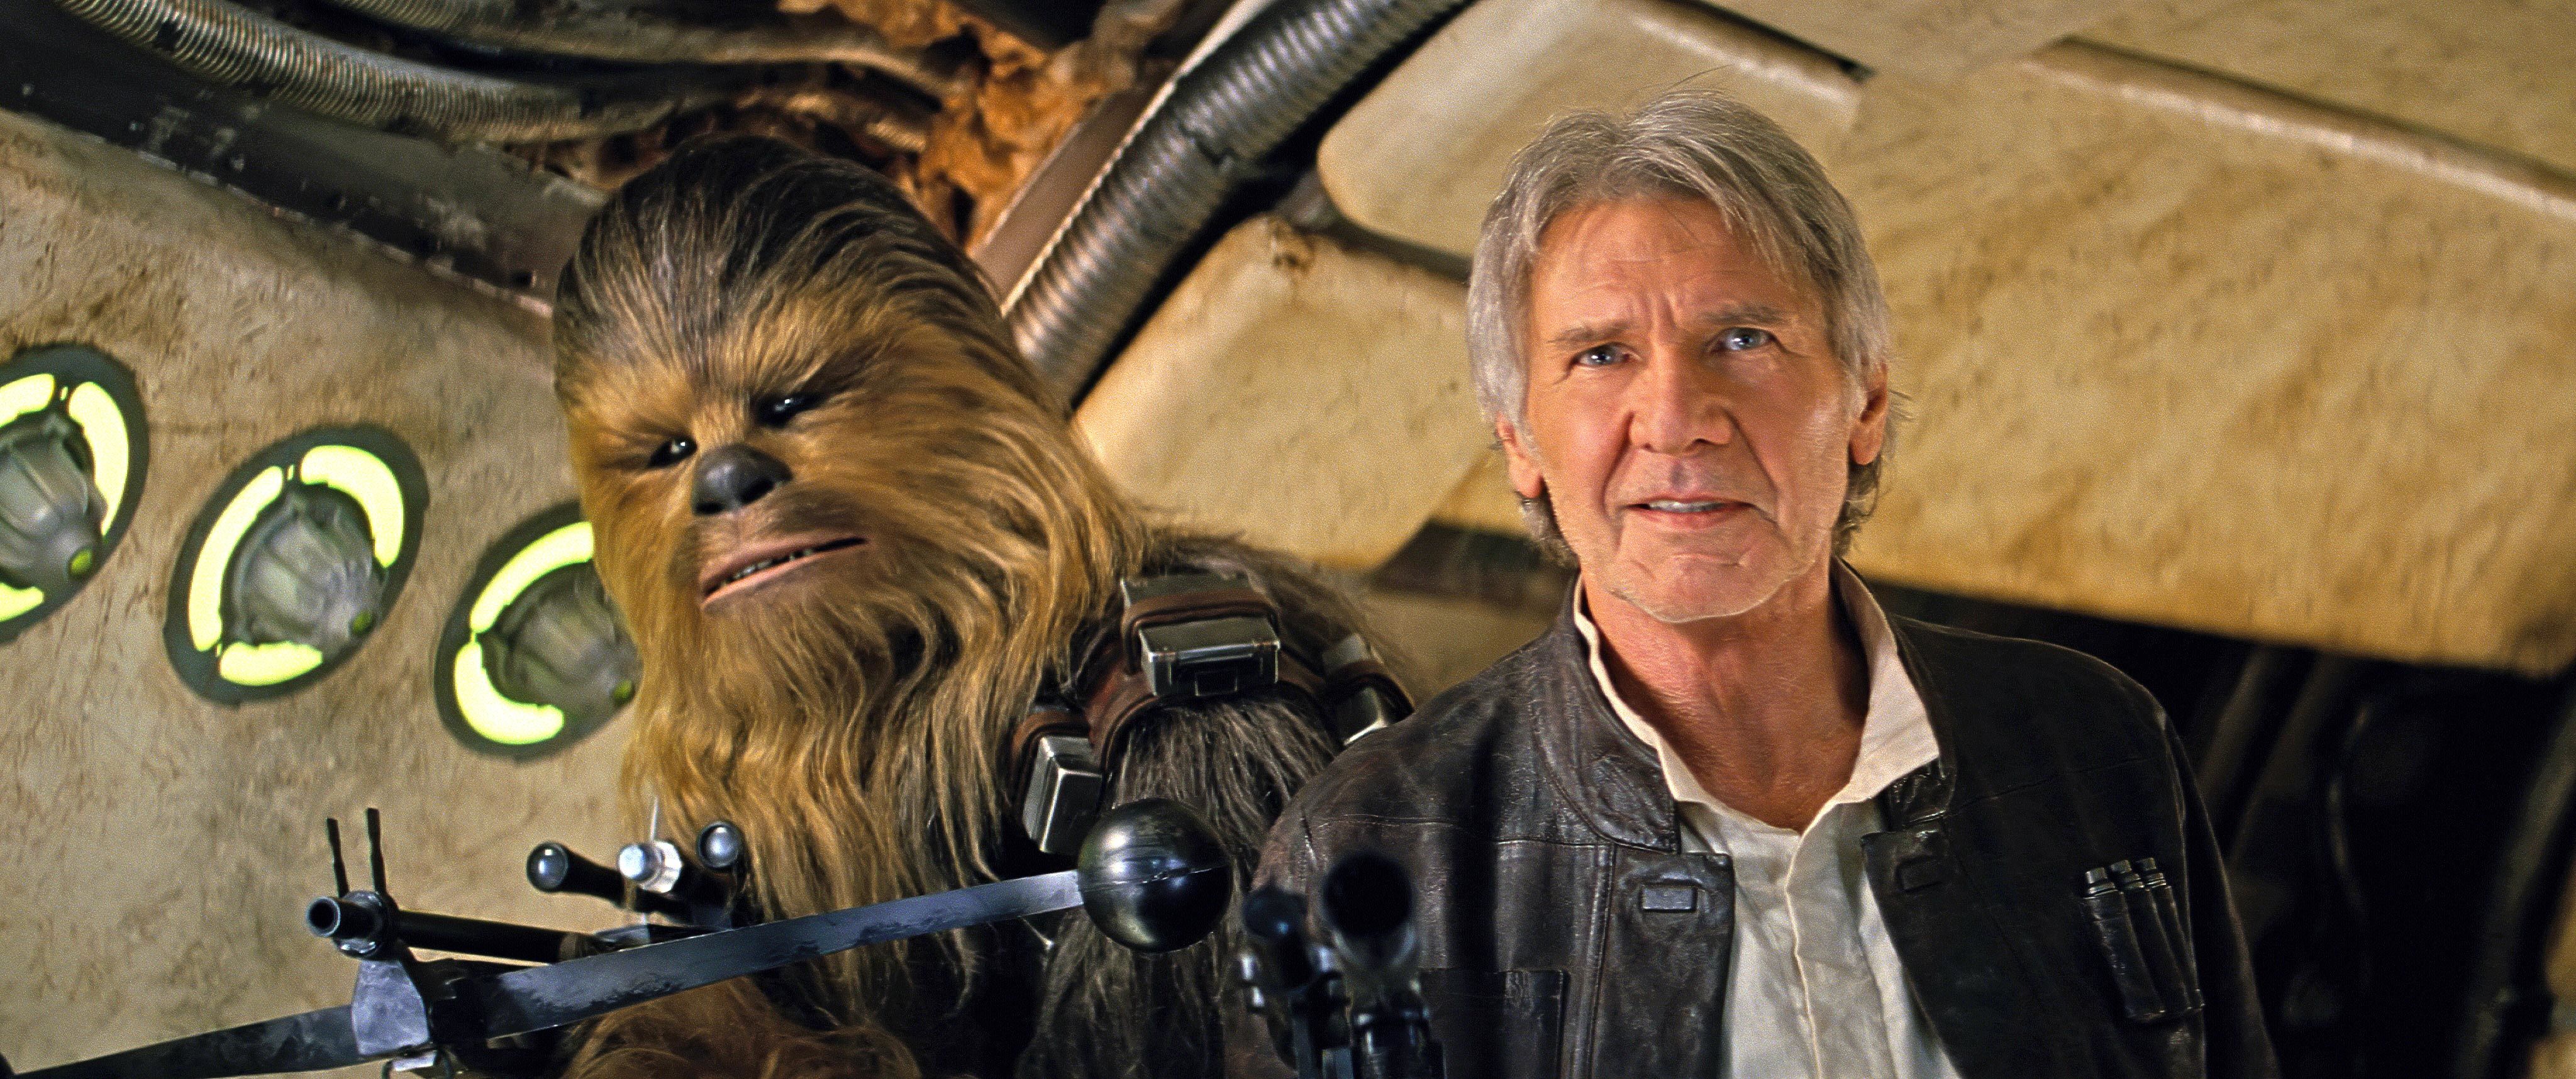 han-solo-chewbacca-and-the-millennium-falcon-return-for-the-star-wars-vii-trailer-362283.jpg